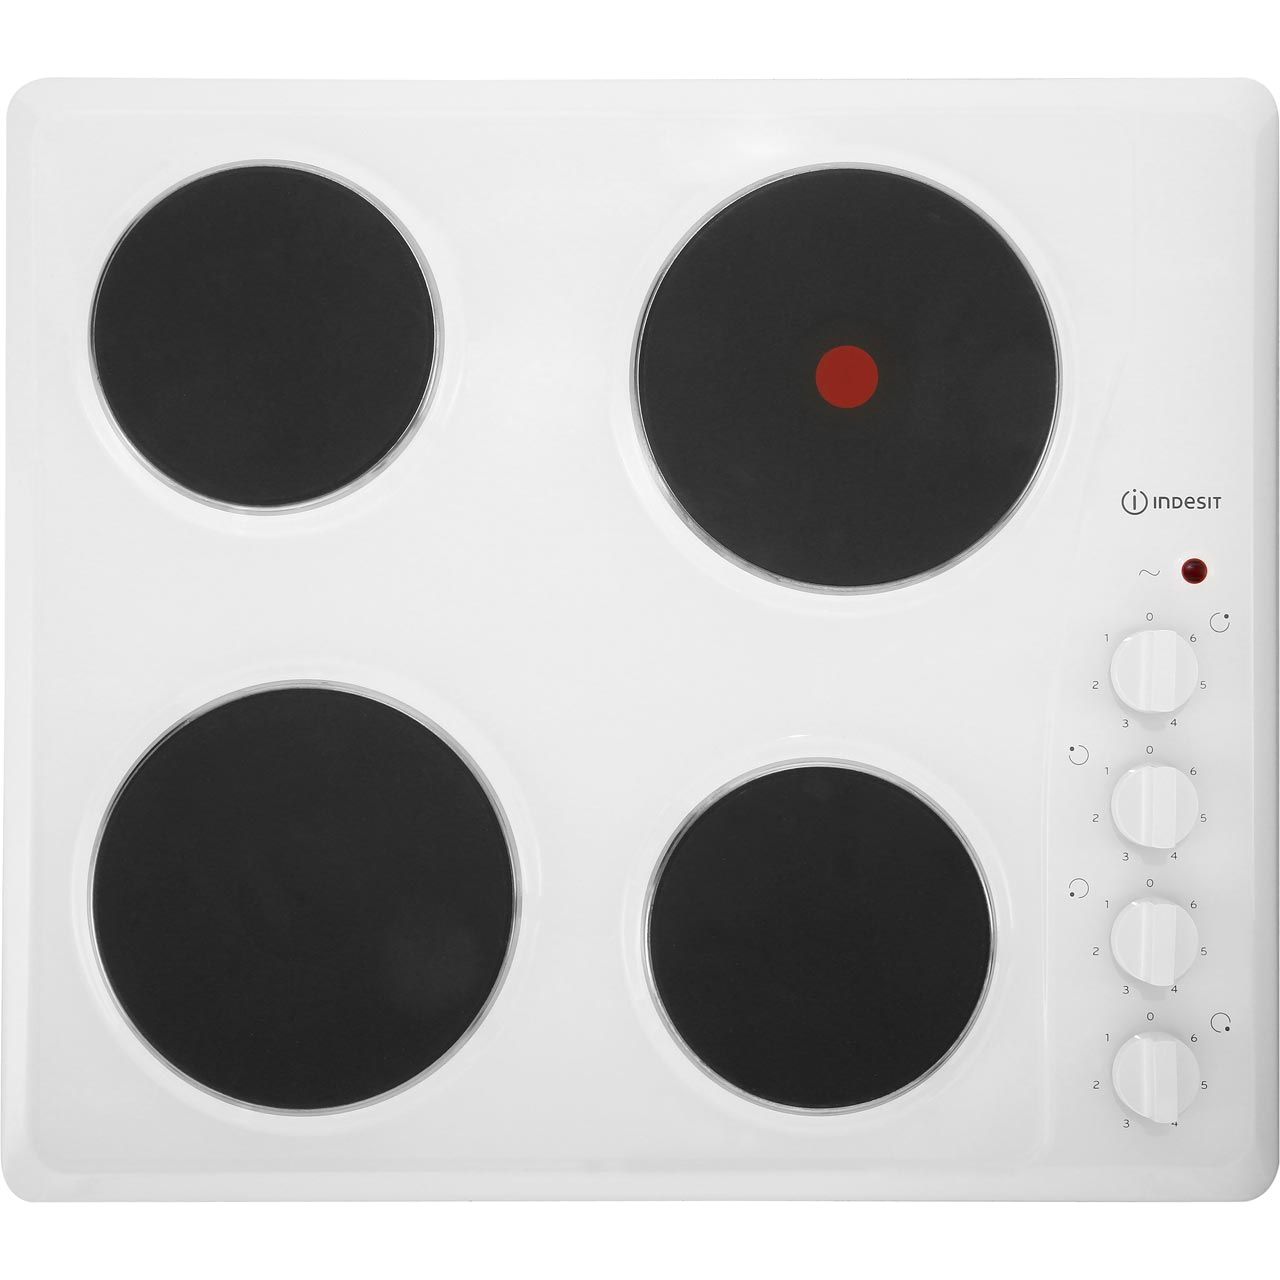 Indesit TI60W 58cm Solid Plate Hob Review